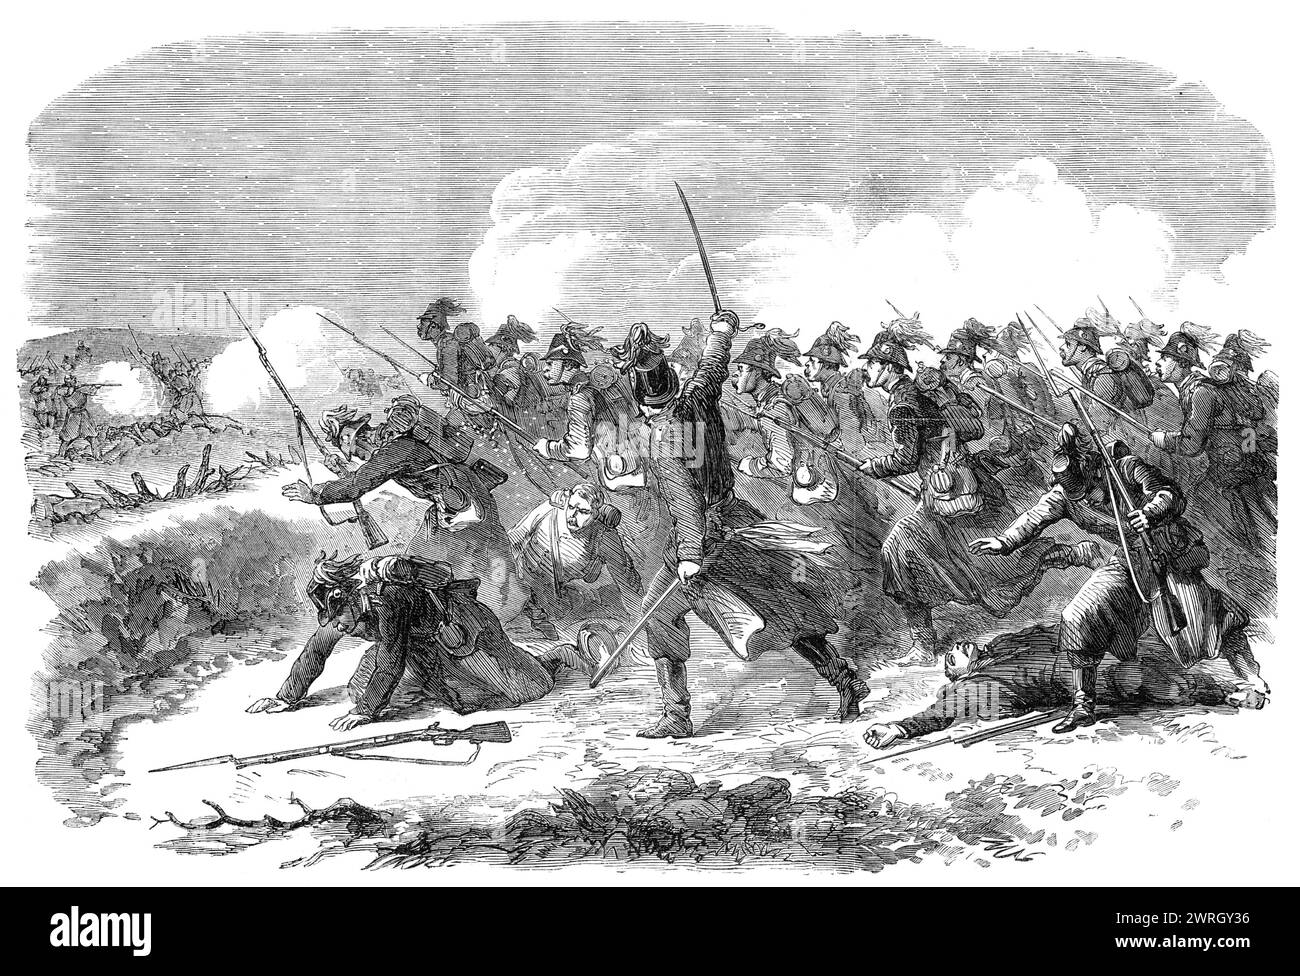 The War in Schleswig: the Battle of Over-Selk - from a sketch by our special artist, 1864. The Battle of K&#xf6;nigsh&#xfc;gel, also known as the Battle of Ober-Selk, was a battle in the Second Schleswig War where Austrian Major General Gondrecourt and his infantry brigade succeeded in occupying the area in front of the Danevirke near Ober-Selk and taking the strategically important village of K&#xf6;nigsh&#xfc;gel in Schleswig-Holstein. From &quot;Illustrated London News&quot;, 1864. Stock Photo